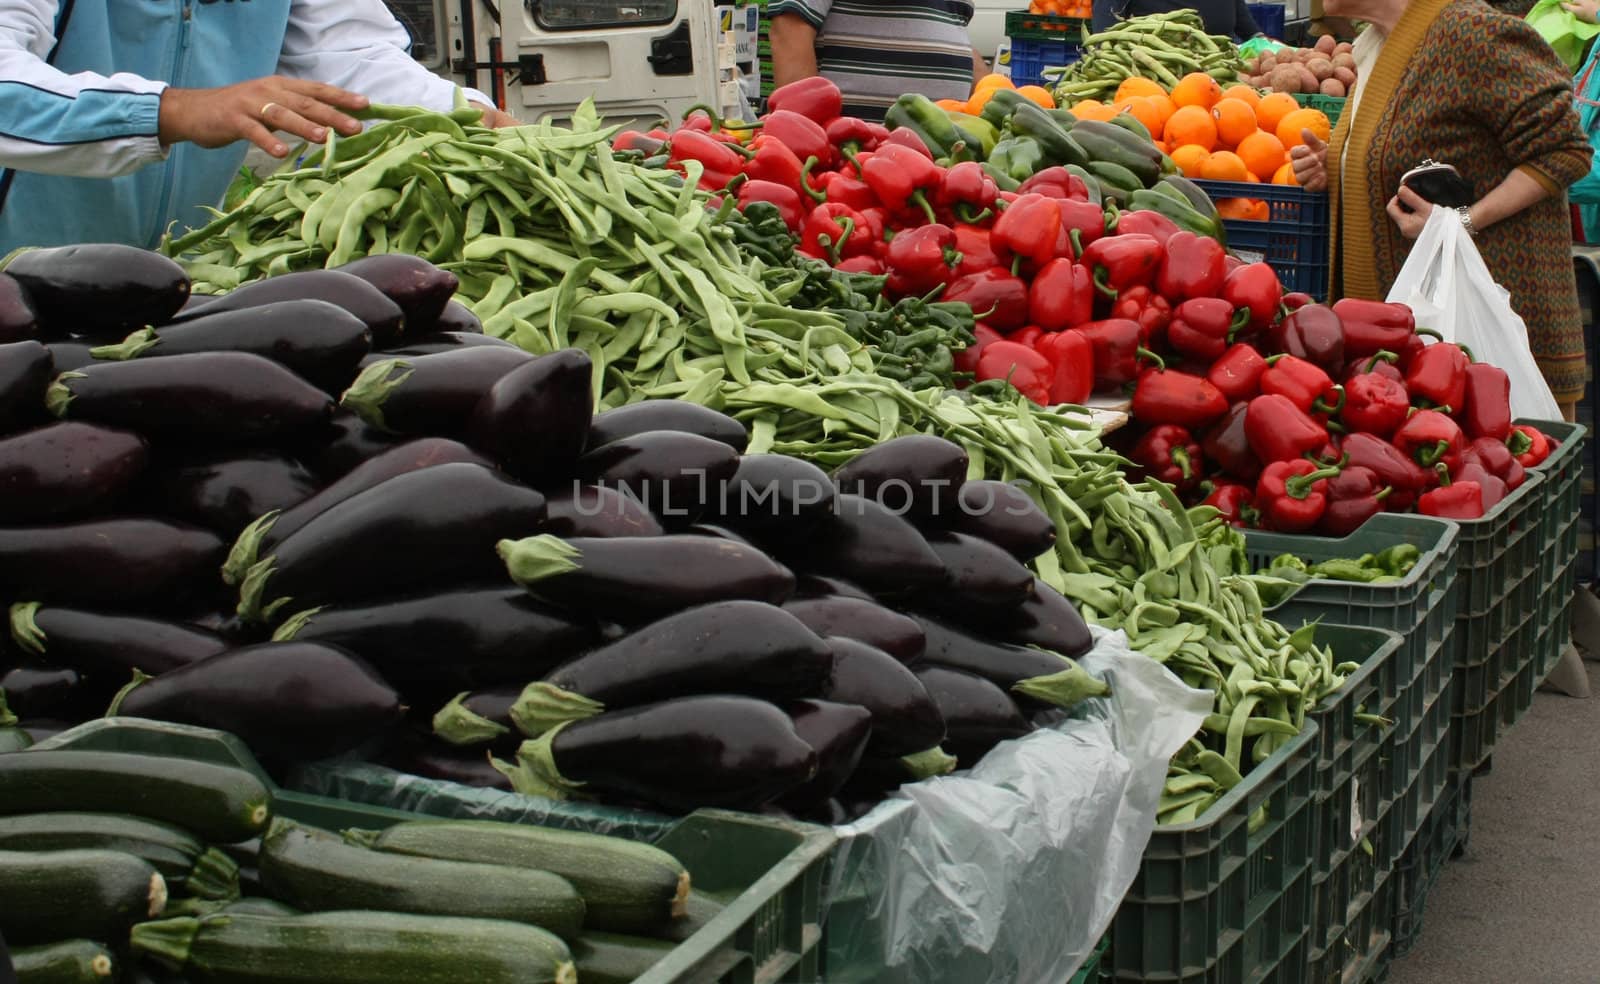 Fruit and Vegetable Stand in Spain by Brigida_Soriano